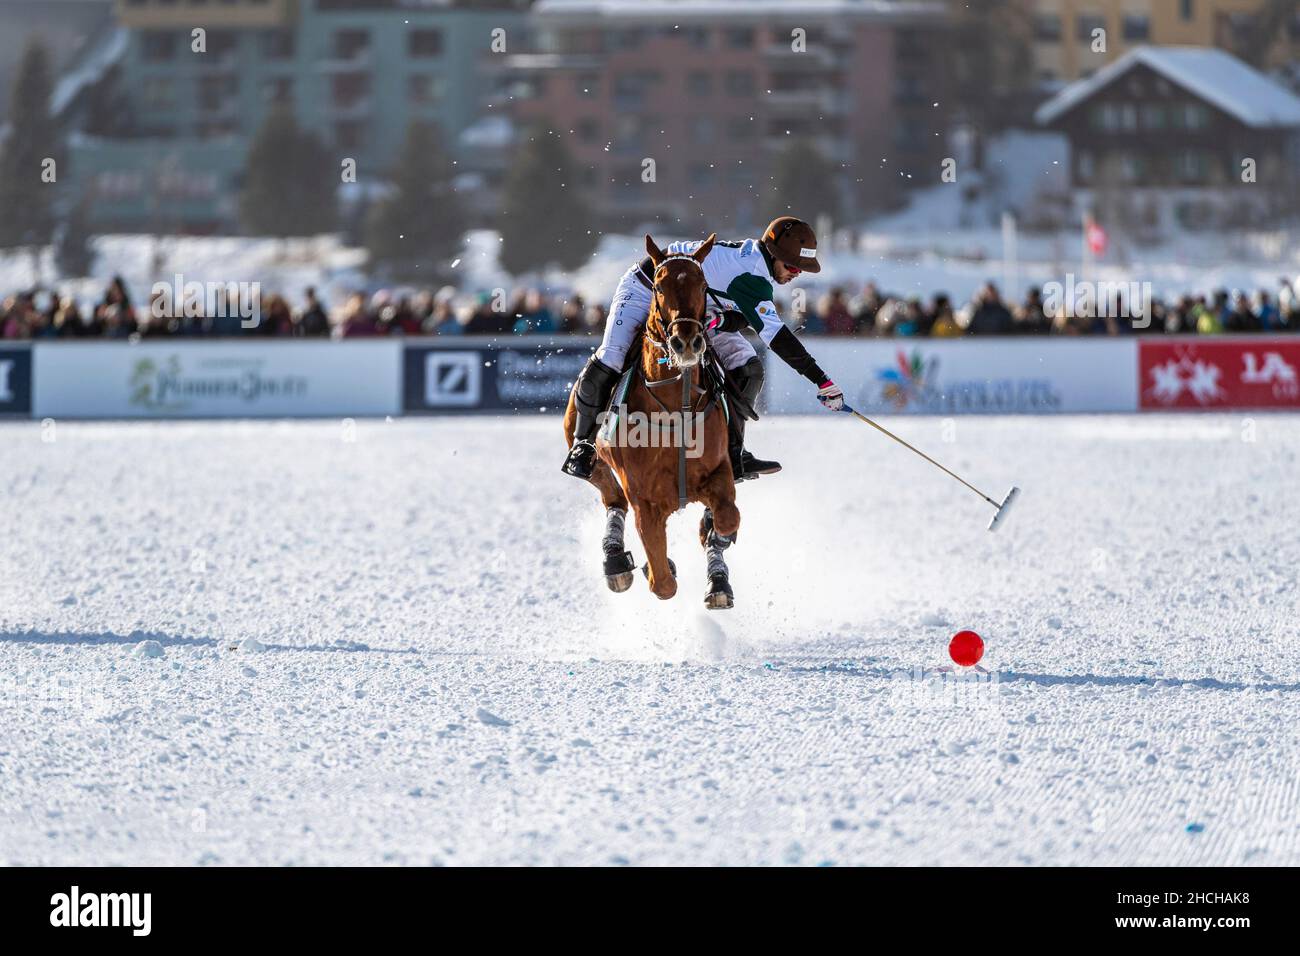 Santiago Marambio of Team Azerbaijan Land of Fire tries to control the ball at full gallop, 36th Snow Polo World Cup St. Moritz 2020, Lake St. Stock Photo